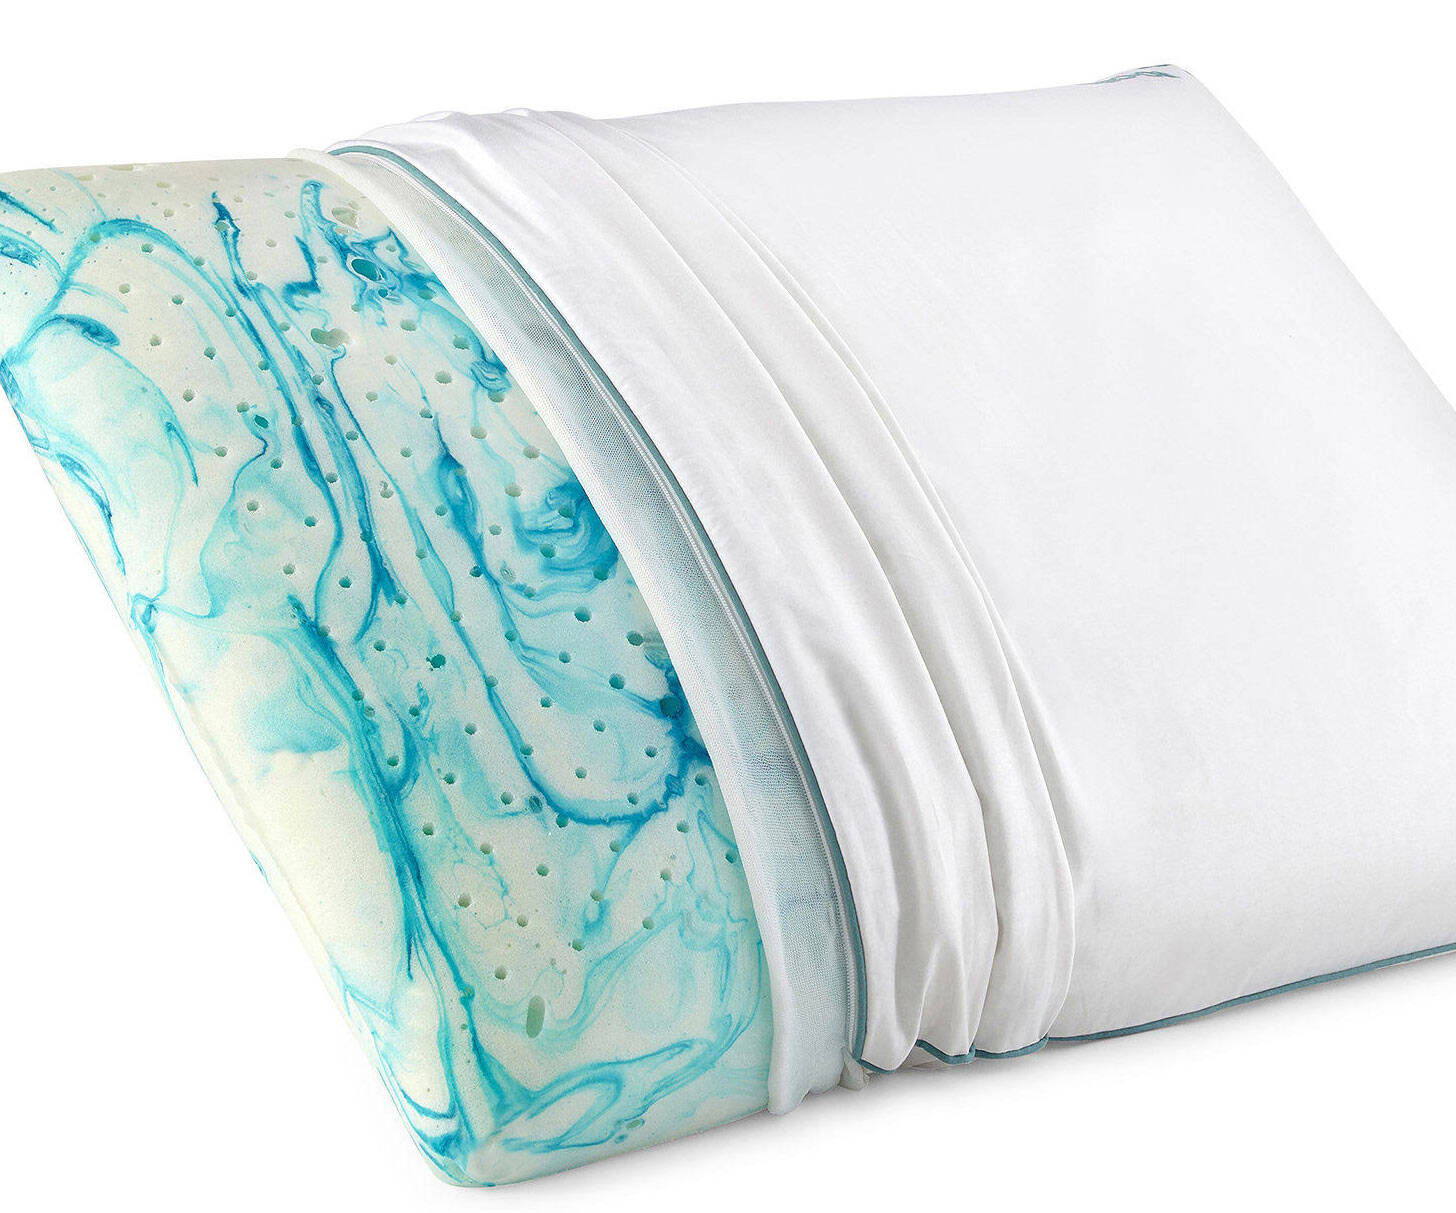 The Perfect Temperature Pillow - coolthings.us